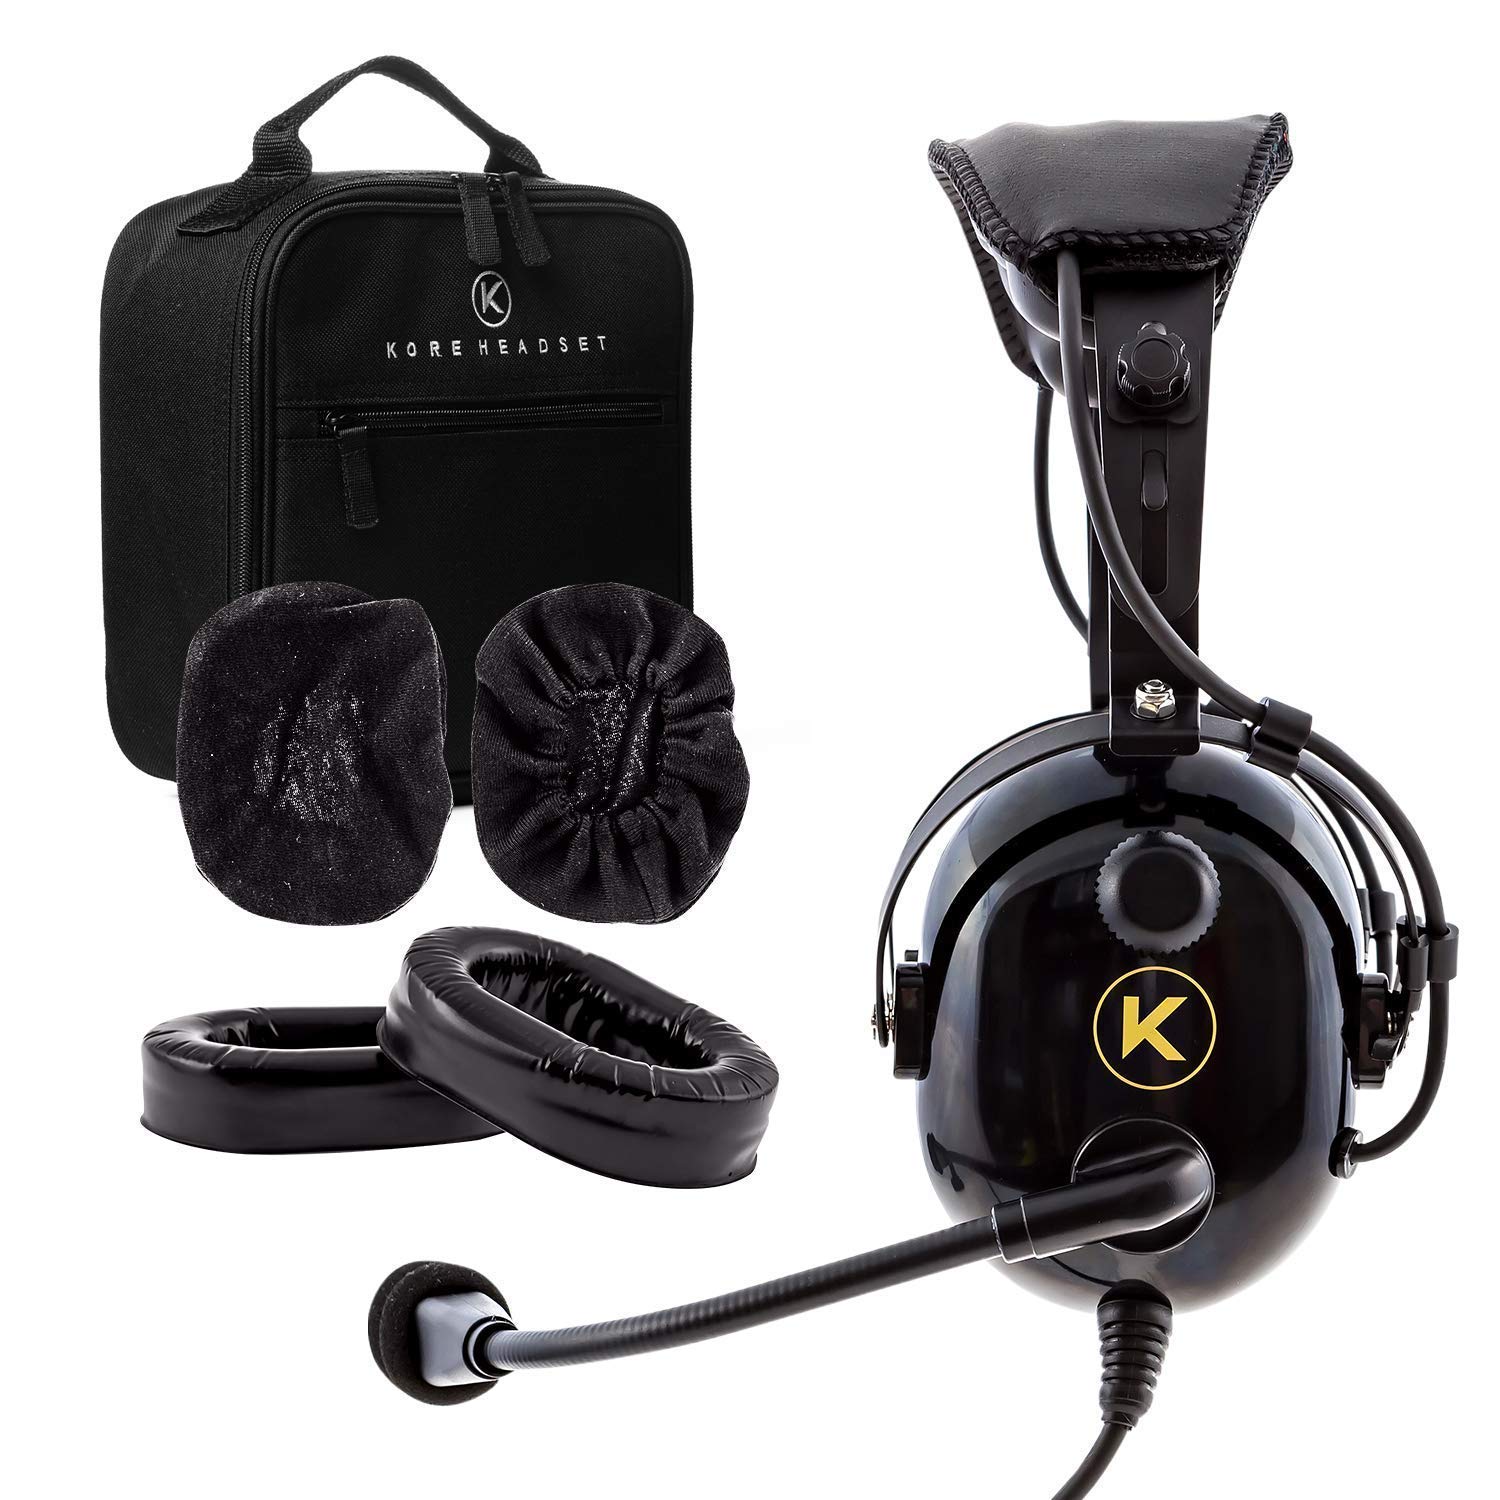 KORE AVIATION KA-1 Premium Gel Ear Seal PNR Pilot Aviation Headset with MP3 Support, Carrying Case, Cloth Ear Covers, Extra Gel Ear Seals Included